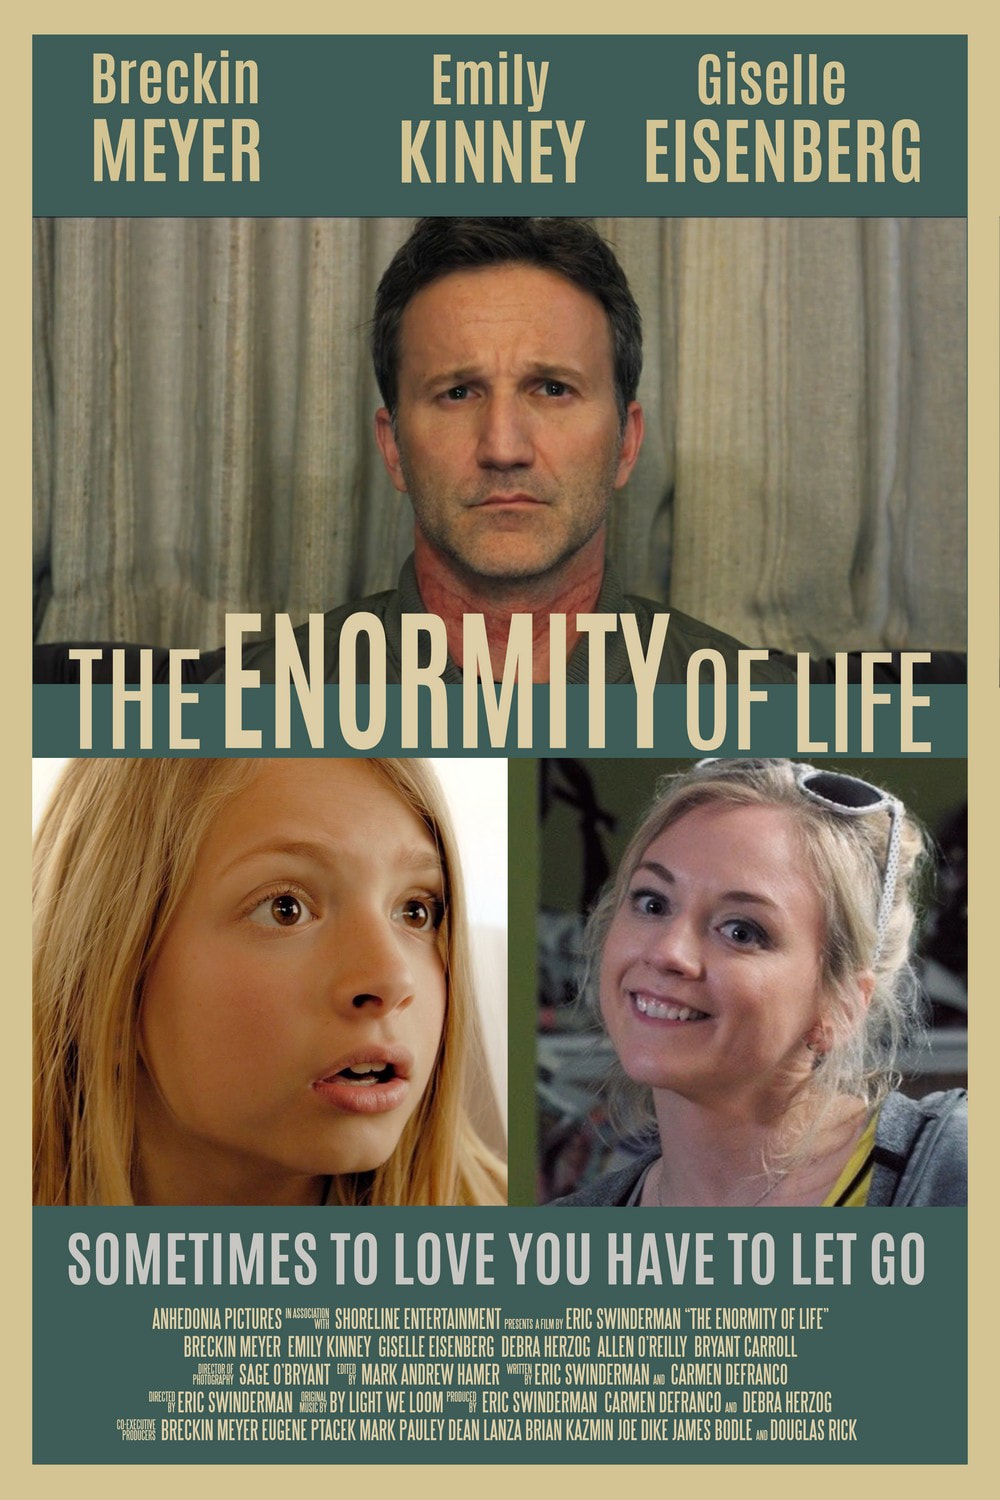 The Enormity of Life poster.